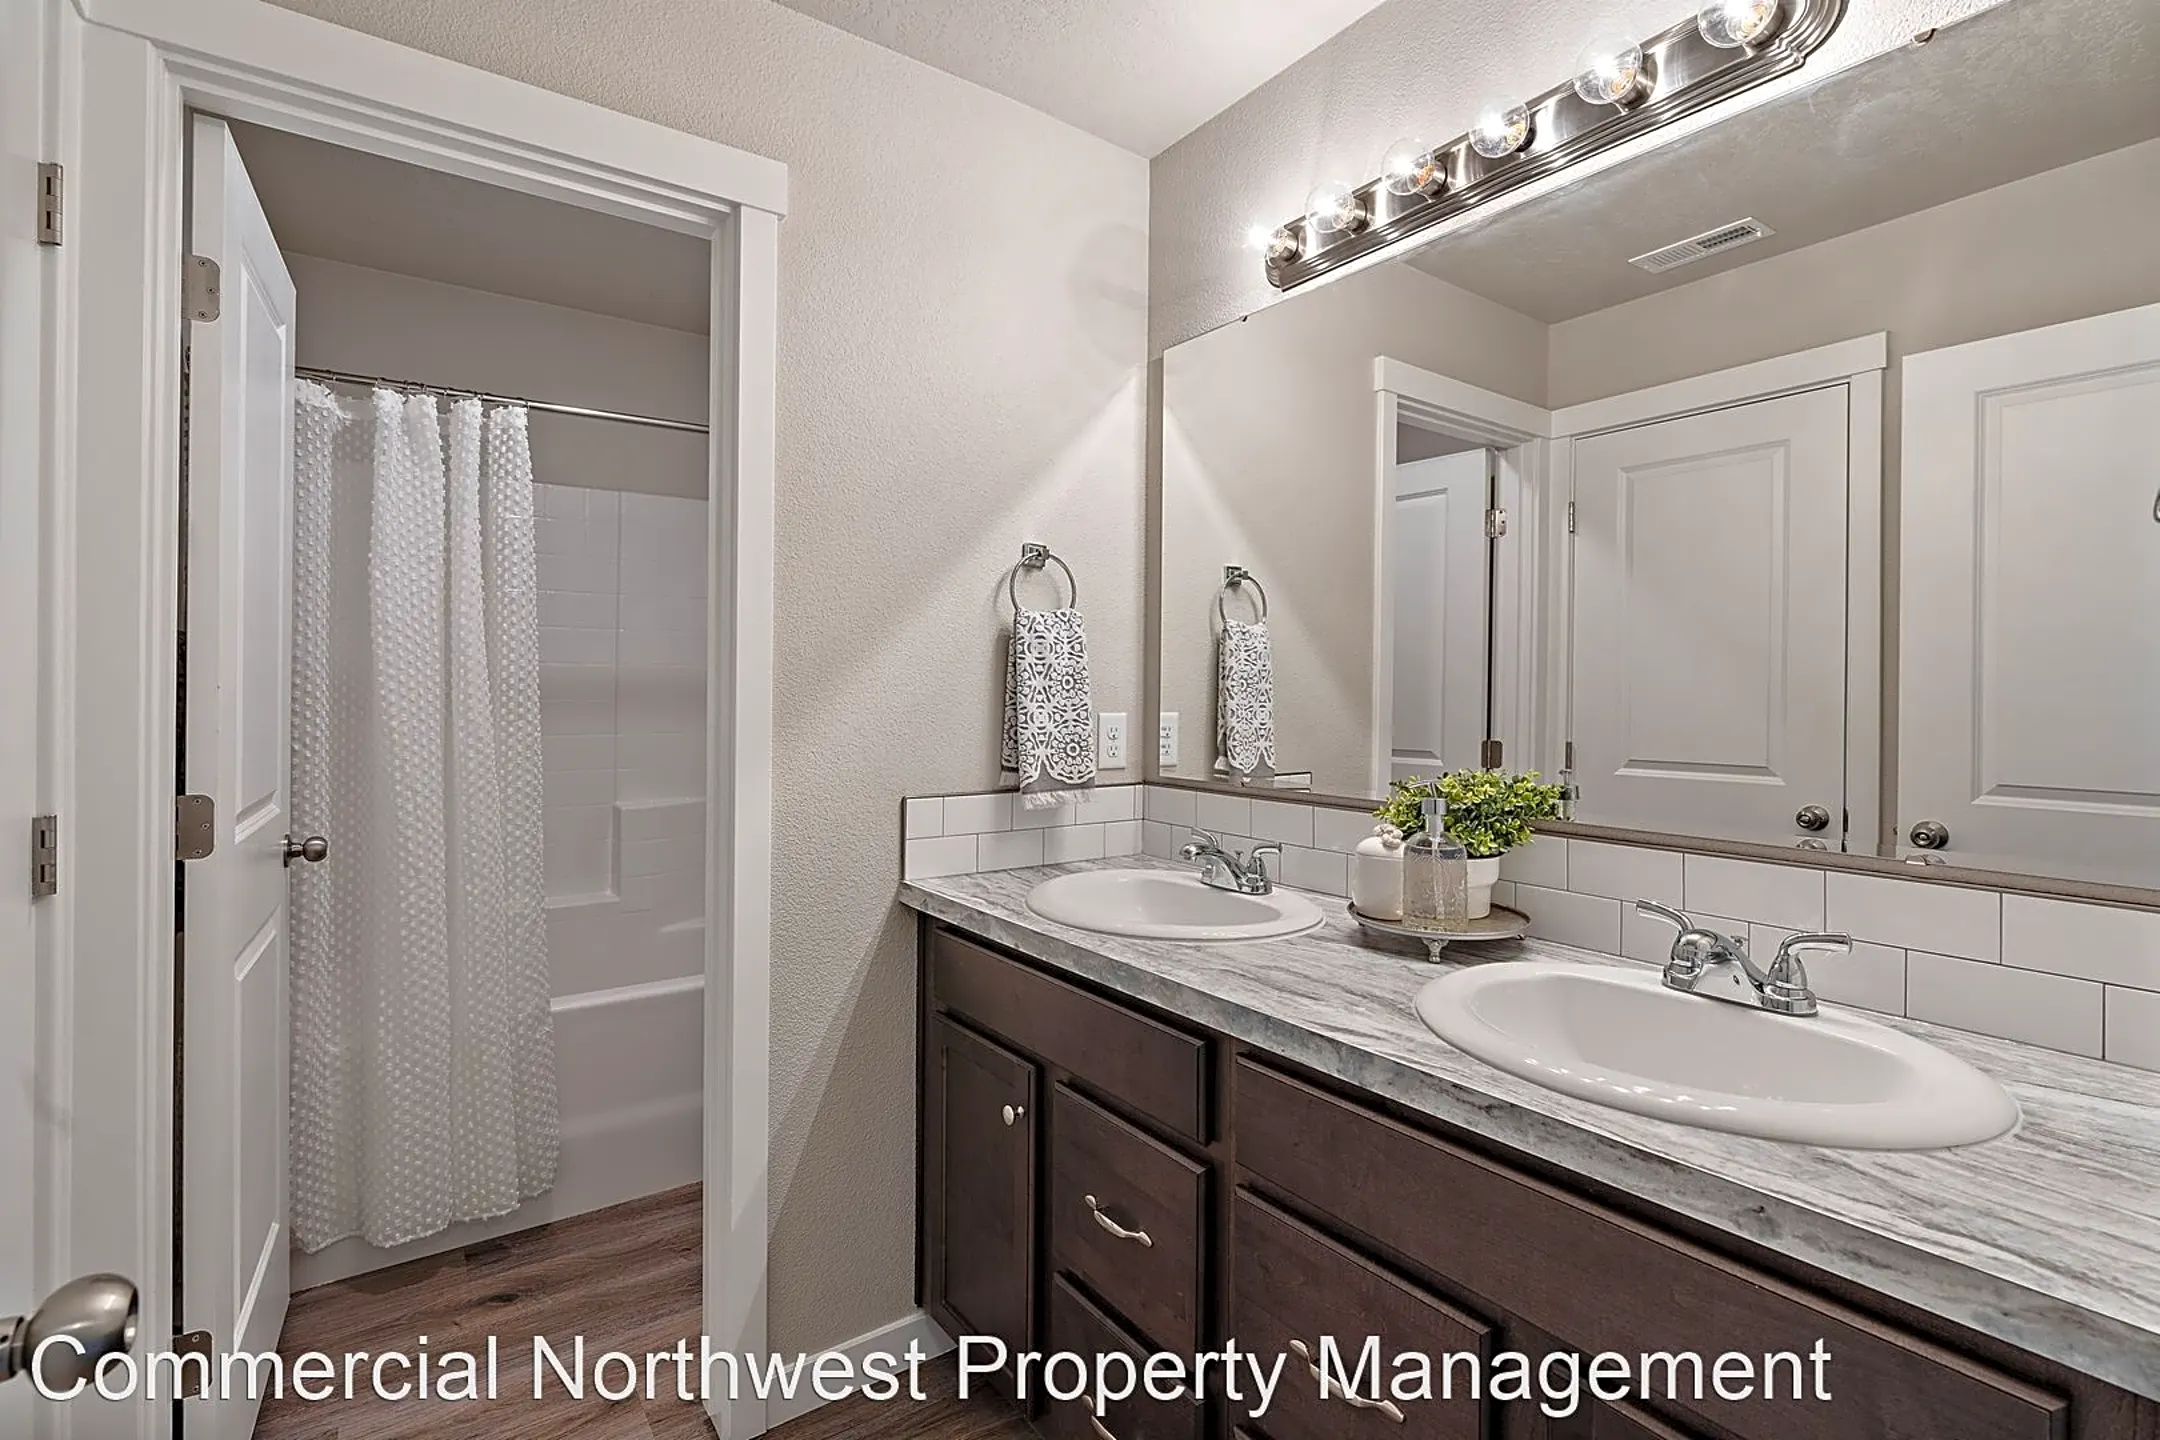 Bathroom - Sunnyvale Village ! 1 Month Free for All Move-ins before 3/15! - Nampa, ID